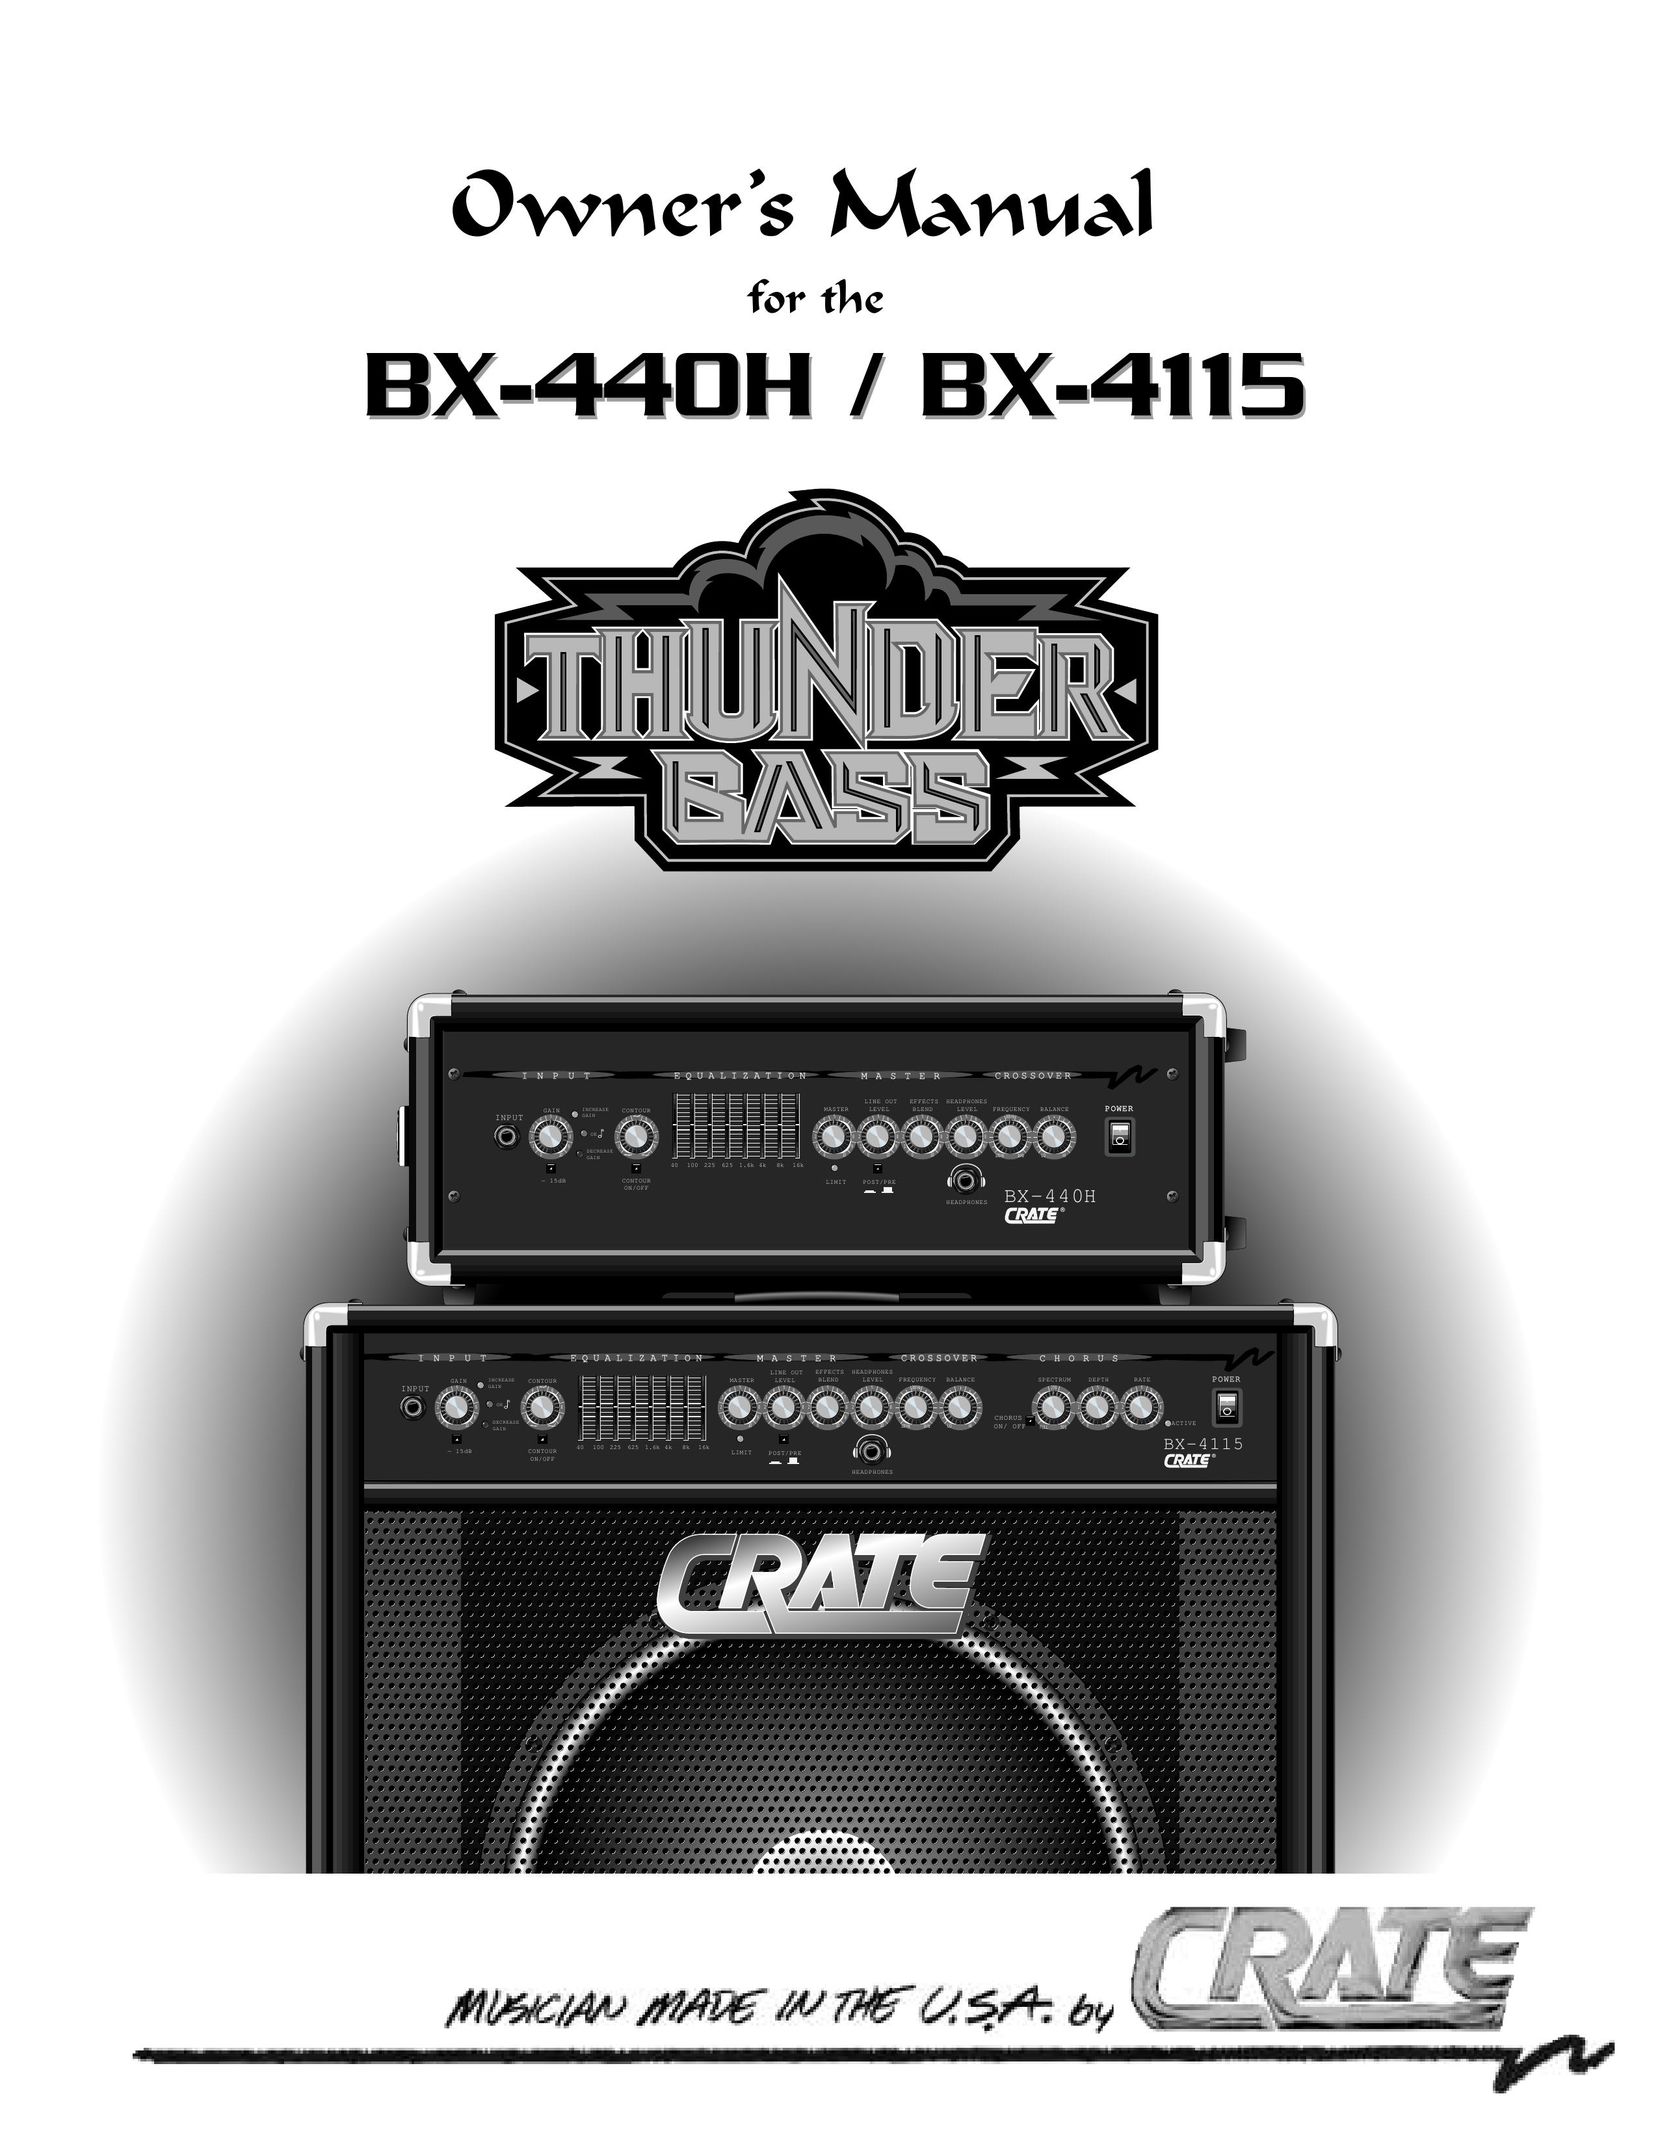 Crate Amplifiers BX-440H Stereo Amplifier User Manual